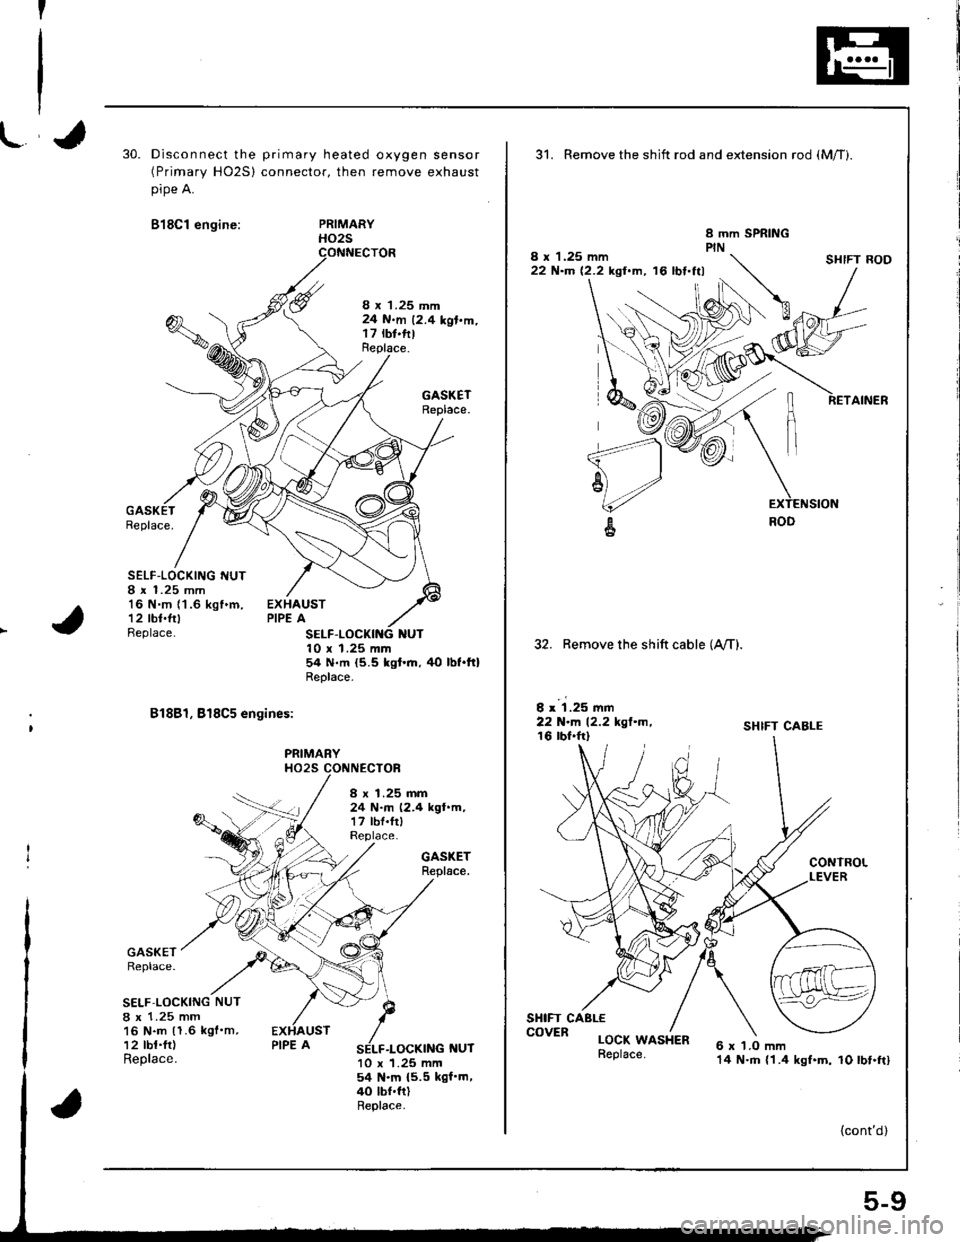 HONDA INTEGRA 1998 4.G Repair Manual 7
30.Disconnect the primary heated oxygen sensor(Primary HO2S) connector, then remove exhaust
pipe A.
818C1 engine:PRIMARYHO2S
8 x 1.25 mm24 N.m 12.4 kgl.m.t7 rbt.fttReplace.
GASKETReplace.
Replace.
S